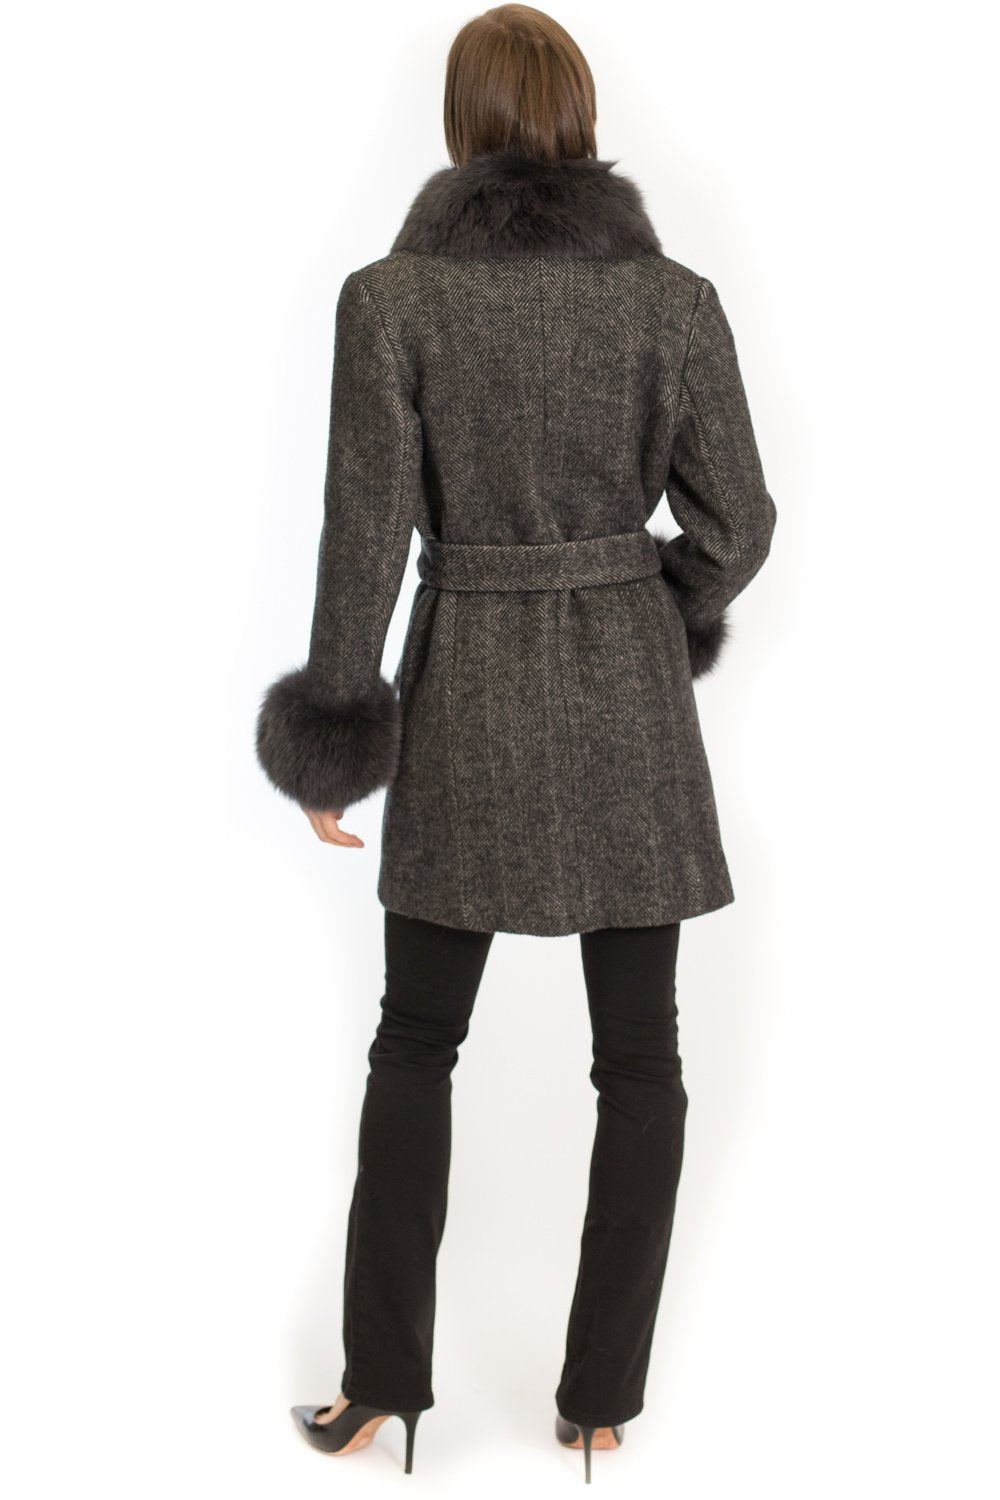 THE LARAMIE Wool Wrap Coat with Oversized Fox Collar and Cuffs - paulamariecollection